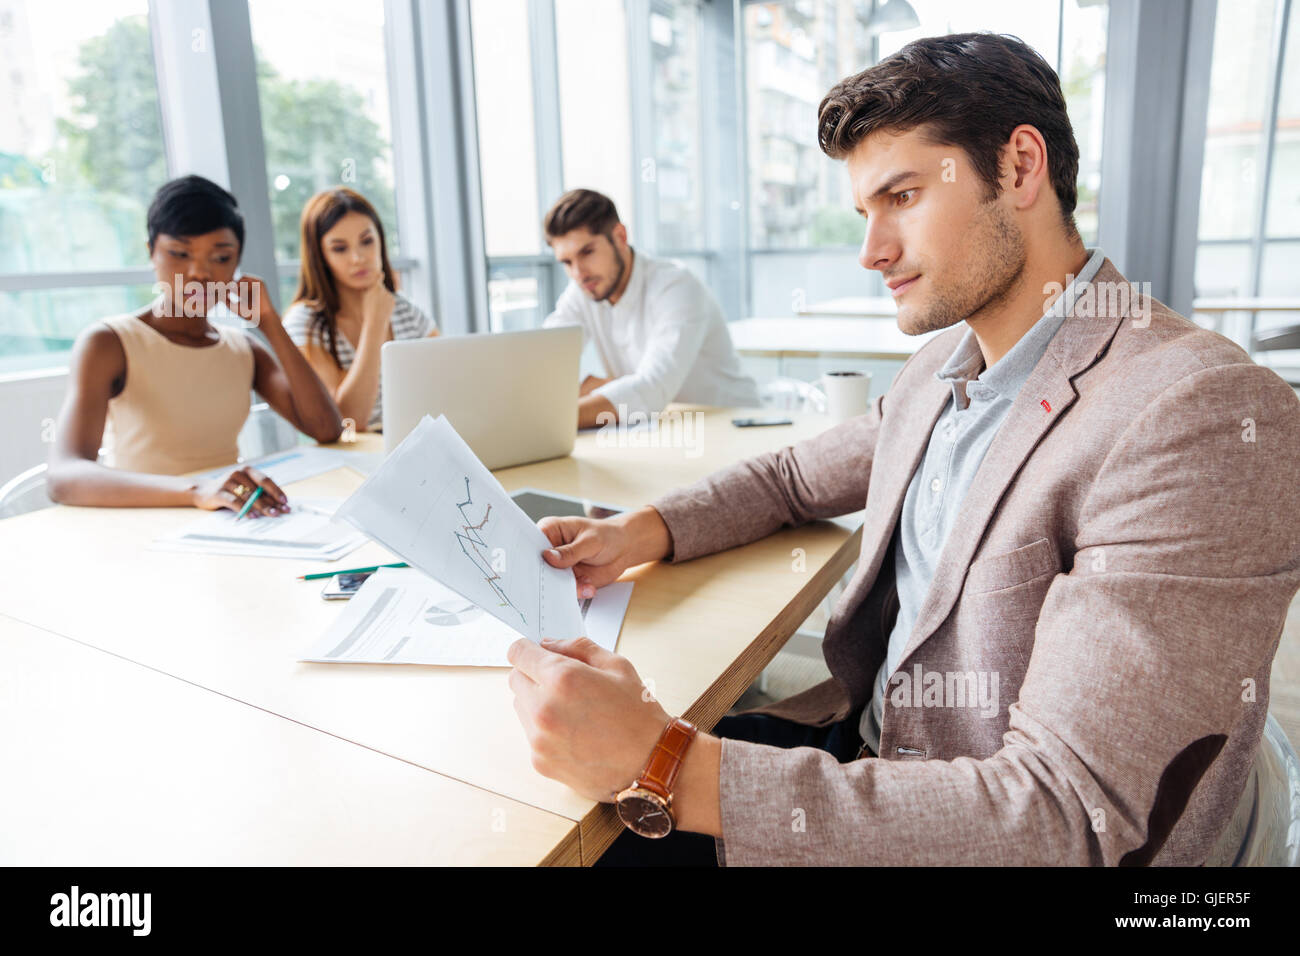 Concentrated young businessman sitting and creating presentation with his business team in office Stock Photo